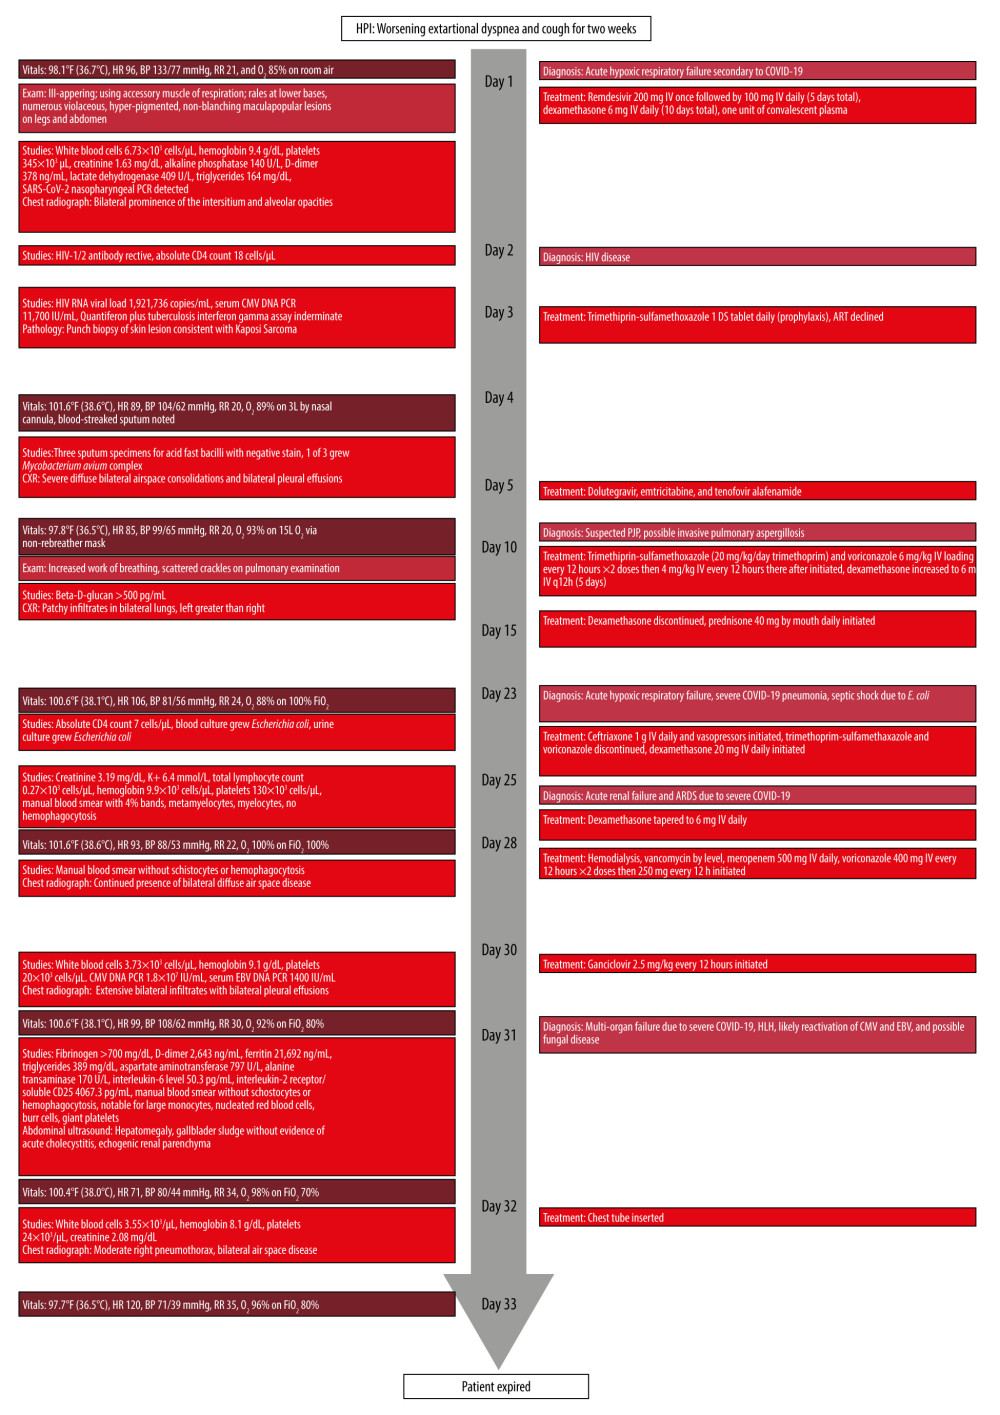 Timeline of clinical course, diagnostic testing, and treatment. HR – heart rate in beats per minute; BP – blood pressure in mmHg; RR – respiratory rate in breaths per minute; O2 – % oxygen saturation; SARS-CoV-2 – severe acute respiratory syndrome coronavirus 2; HIV – human immunodeficiency virus; CMV – cytomegalovirus; ART – antiretroviral therapy; PJP – Pneumocystis jirovecii pneumonia; FiO2 – fraction of inspired oxygen; HLH – hemophagocytic lymphohistiocytosis; EBV – Epstein-Barr virus.